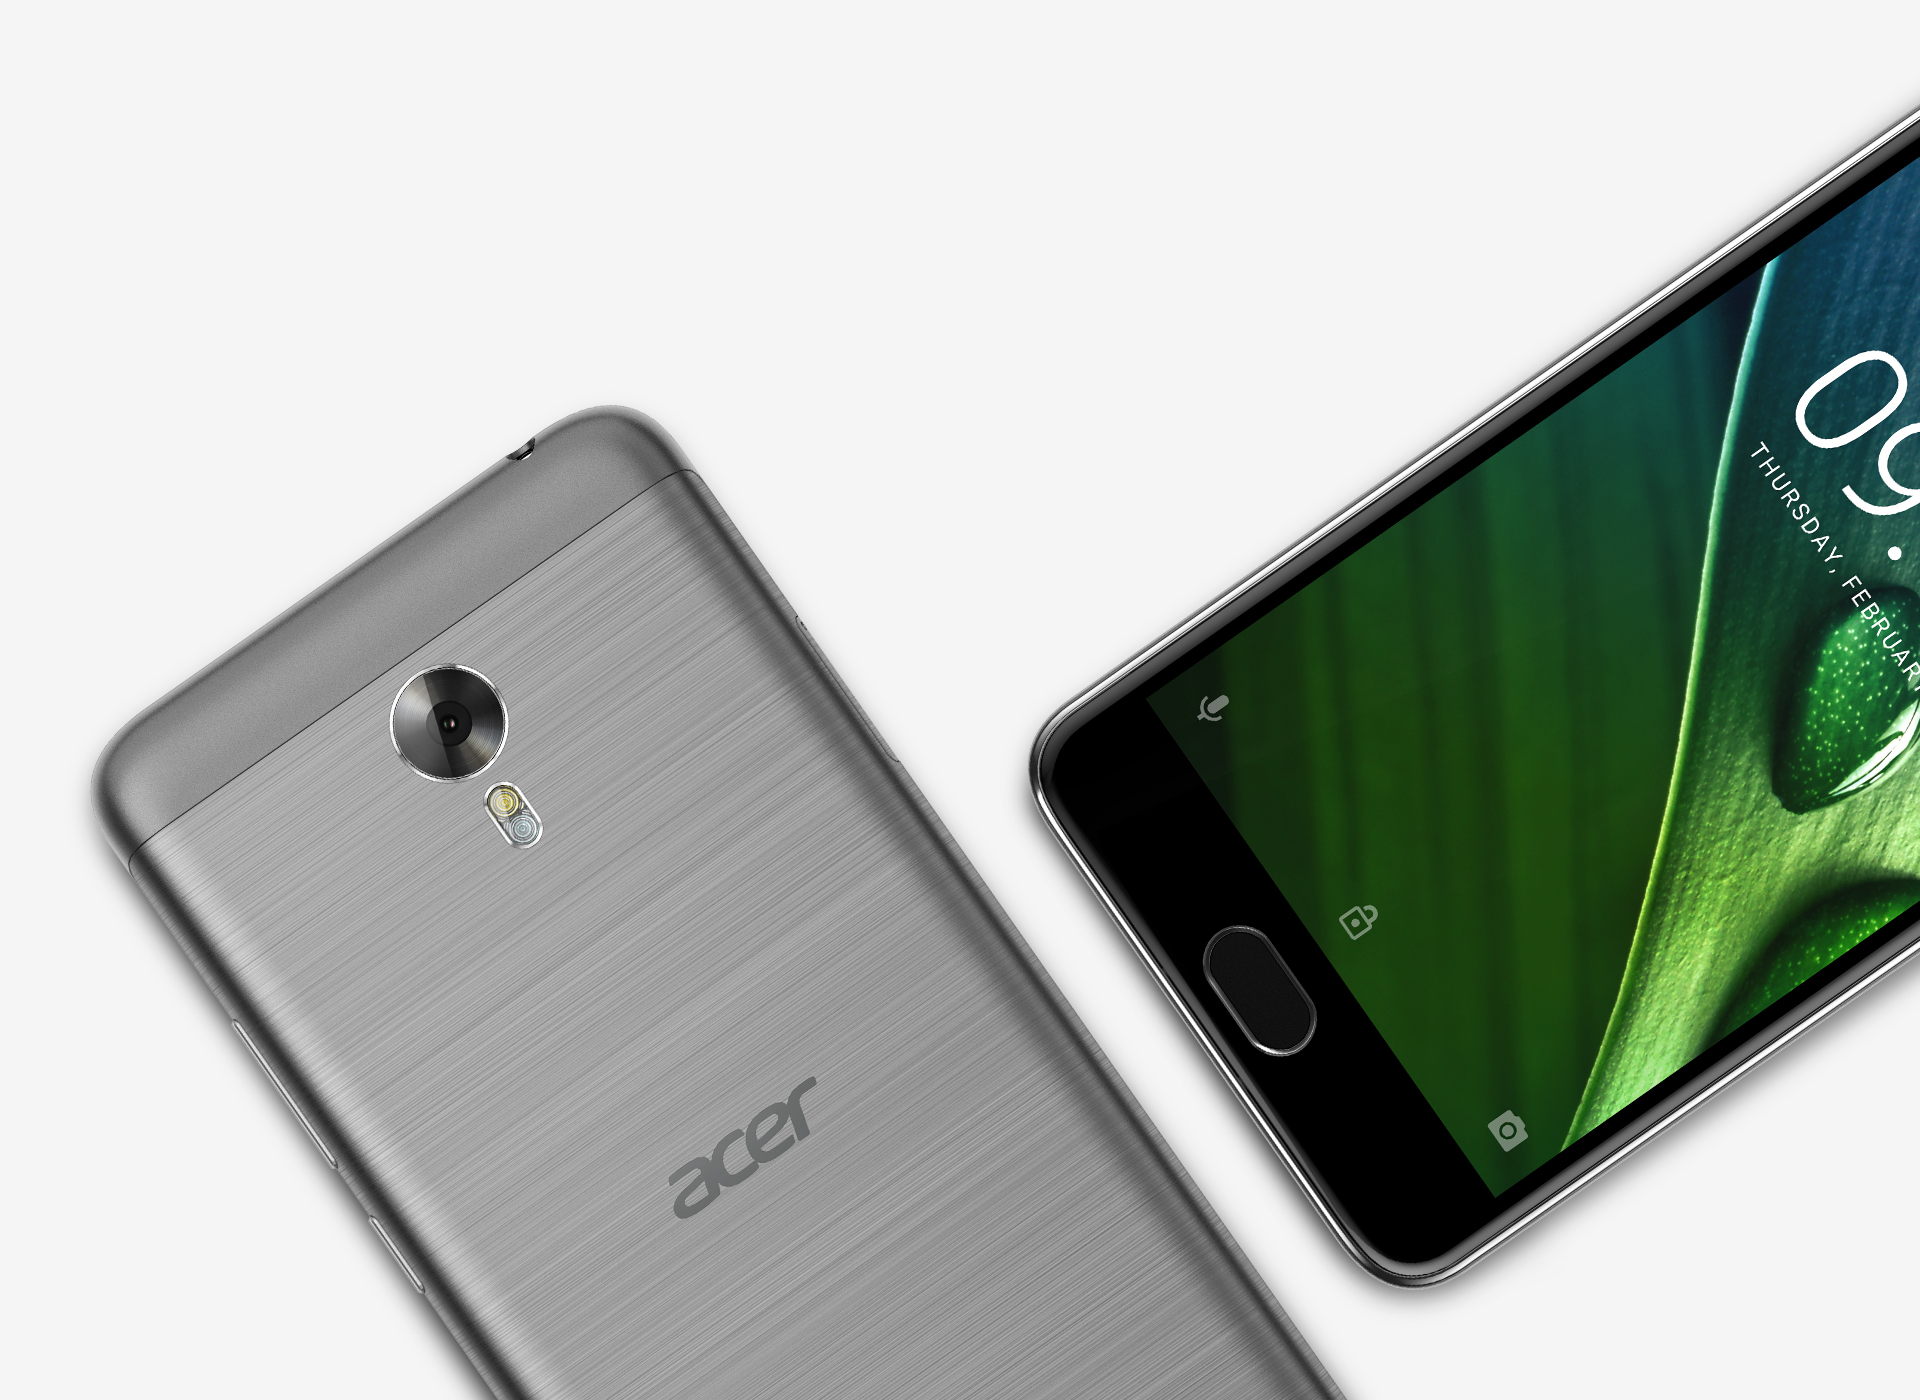 How to Root Acer Liquid Z6 with Magisk without TWRP